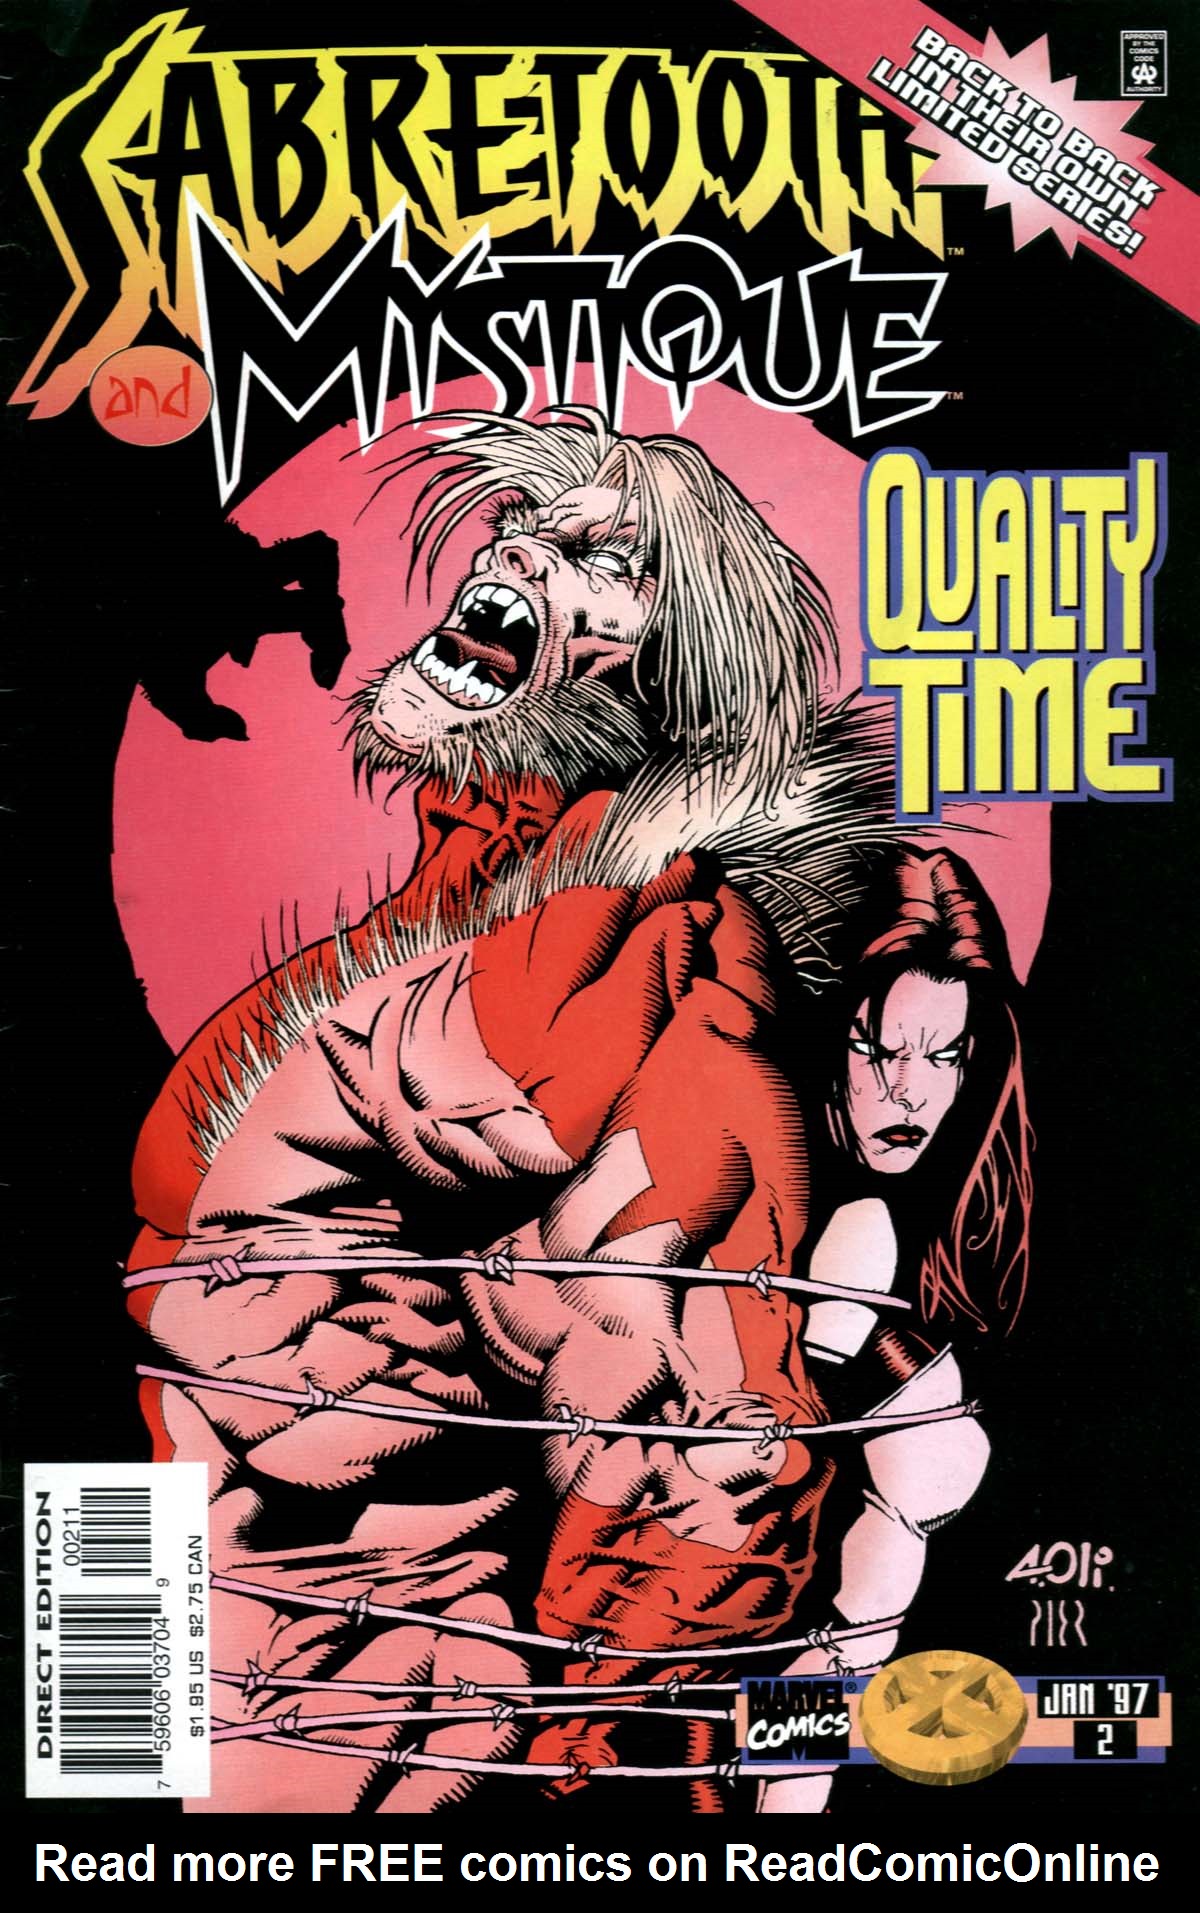 Read online Sabretooth and Mystique comic -  Issue #2 - 1